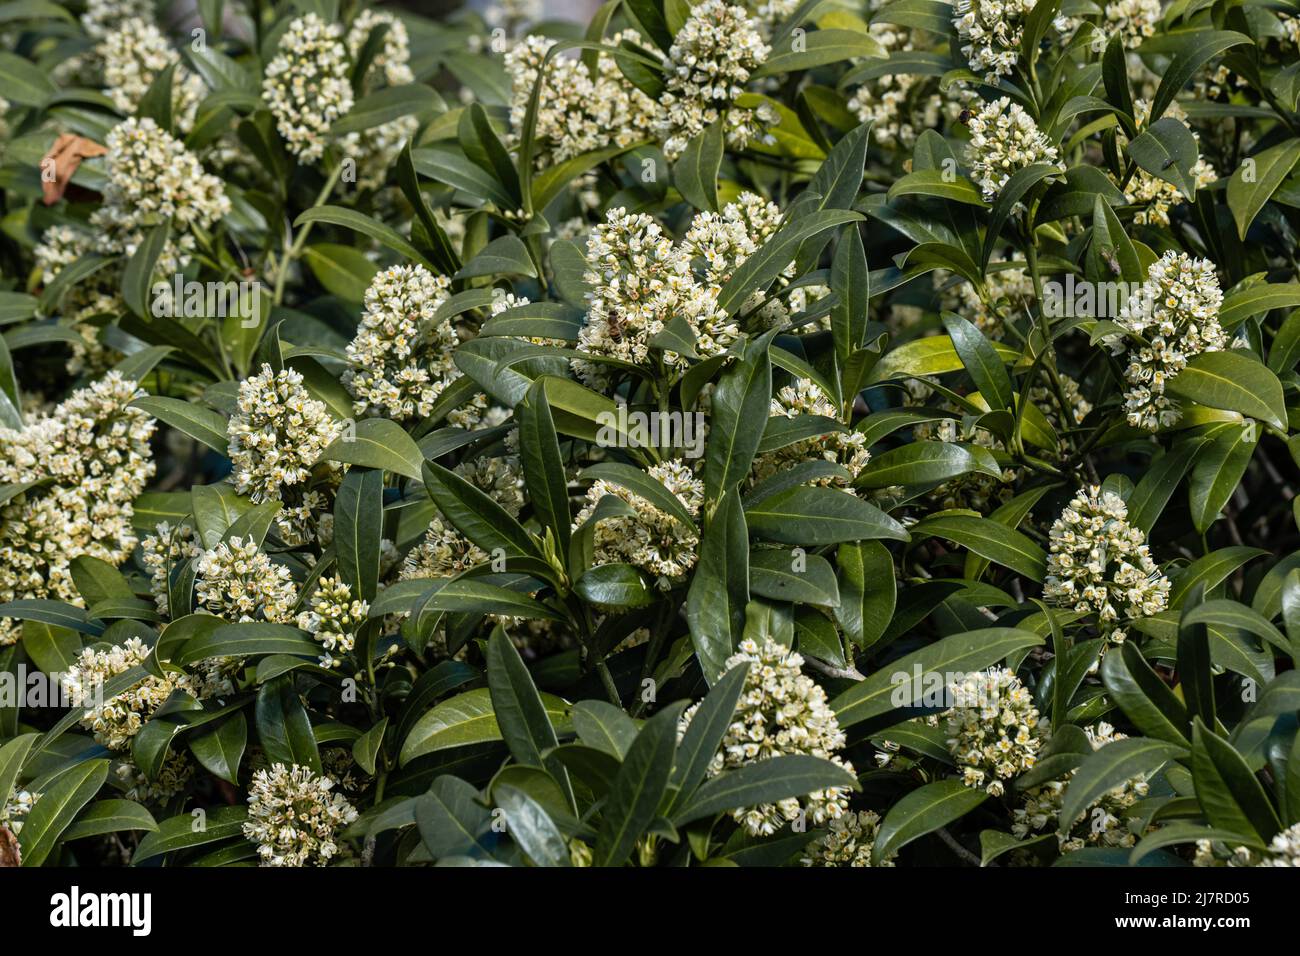 Cluster of Skimmia x confusa Kew Green flowers Stock Photo